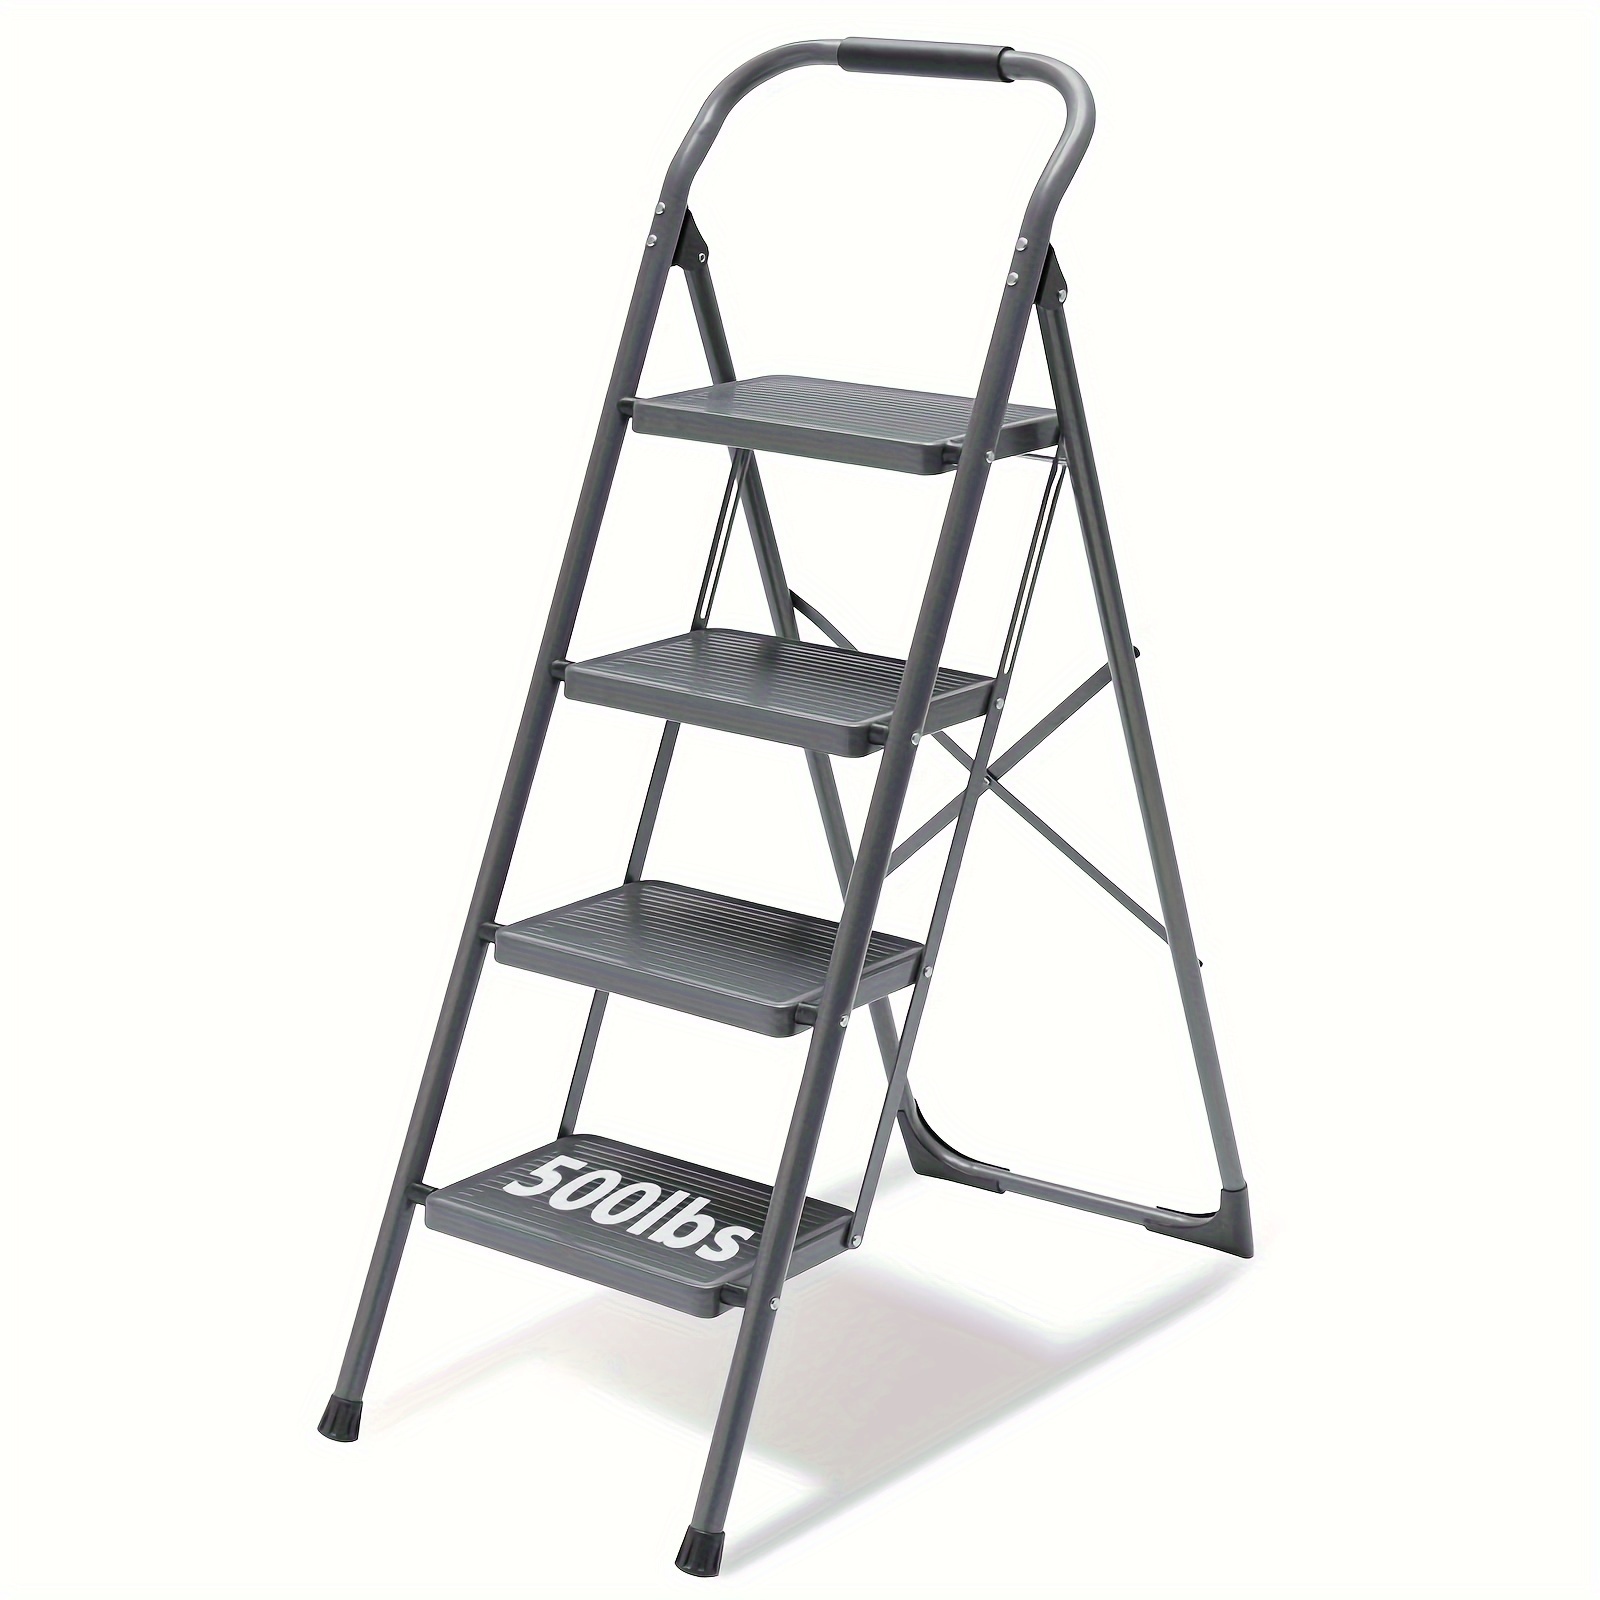 

4 Step Ladder Folding Step Stool With Wide Anti-slip Pedal 330lbs Sturdy Steel Ladder, Ergonomic Handgrip, Lightweight, Portable Kitchen, Office Steel Step Ladder Stool For Adults, Grey